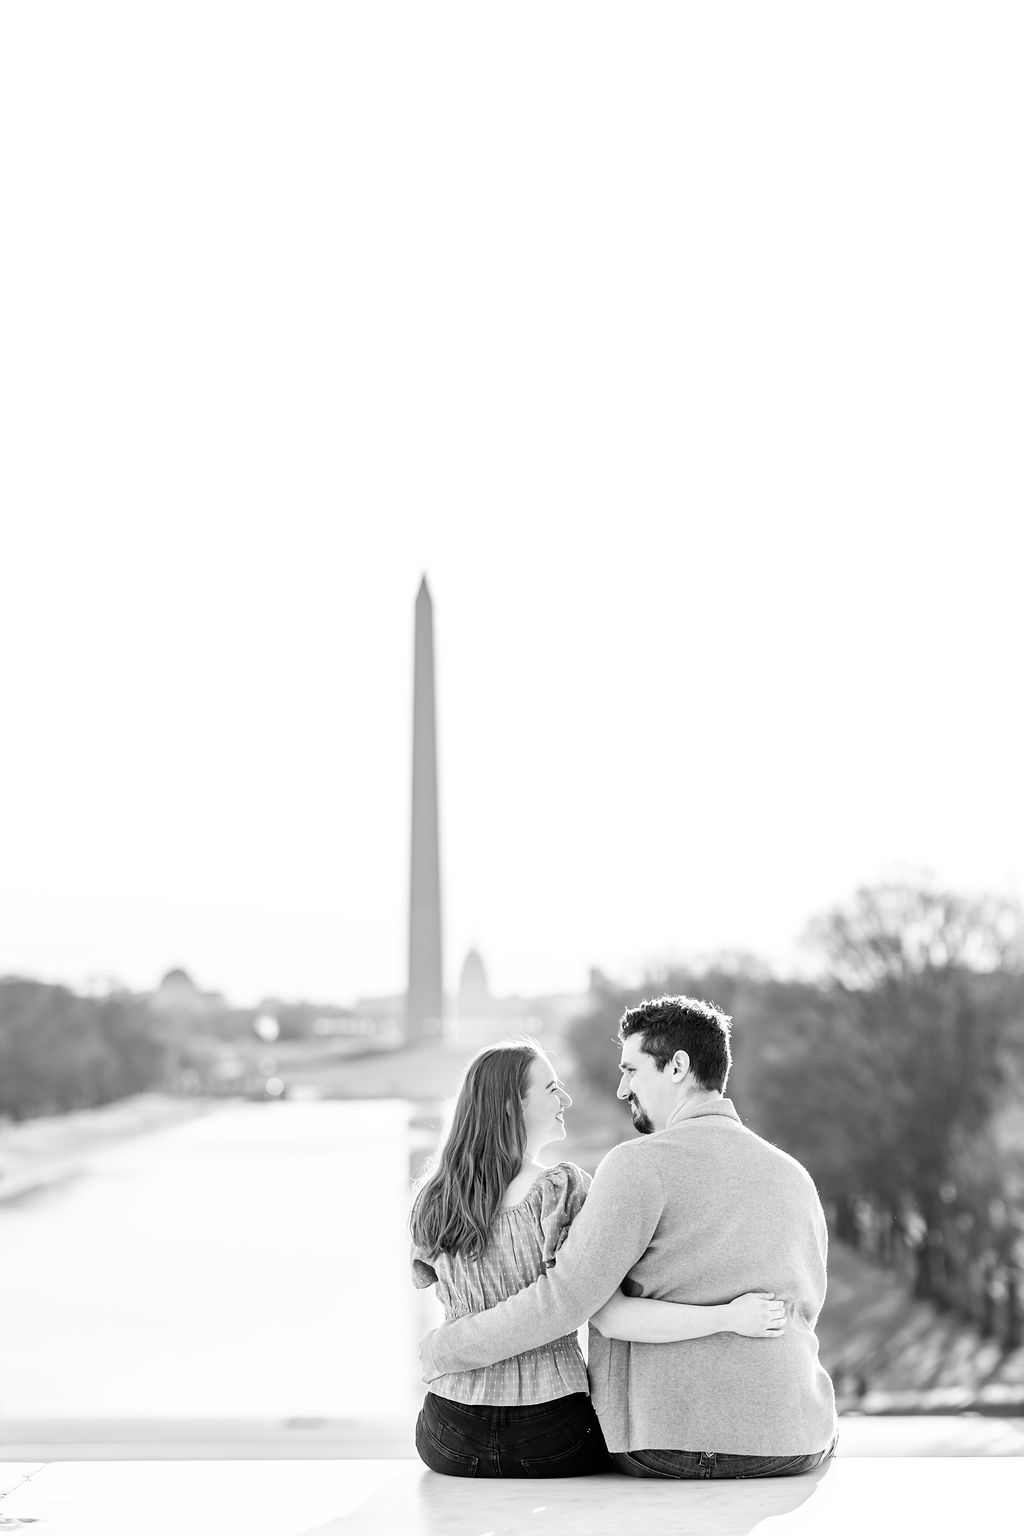 peak bloom cherry blossoms engagement, cherry blossoms engagement photos, DC peak bloom cherry blossoms, DC cherry blossoms photography, DC cherry blossoms photographer, ethereal cherry blossoms photos, DC cherry blossoms, Rachel E.H. Photography, black and white, couple looking at each other, couple sitting, couple with arms around each other, blue off the shoulder blouse